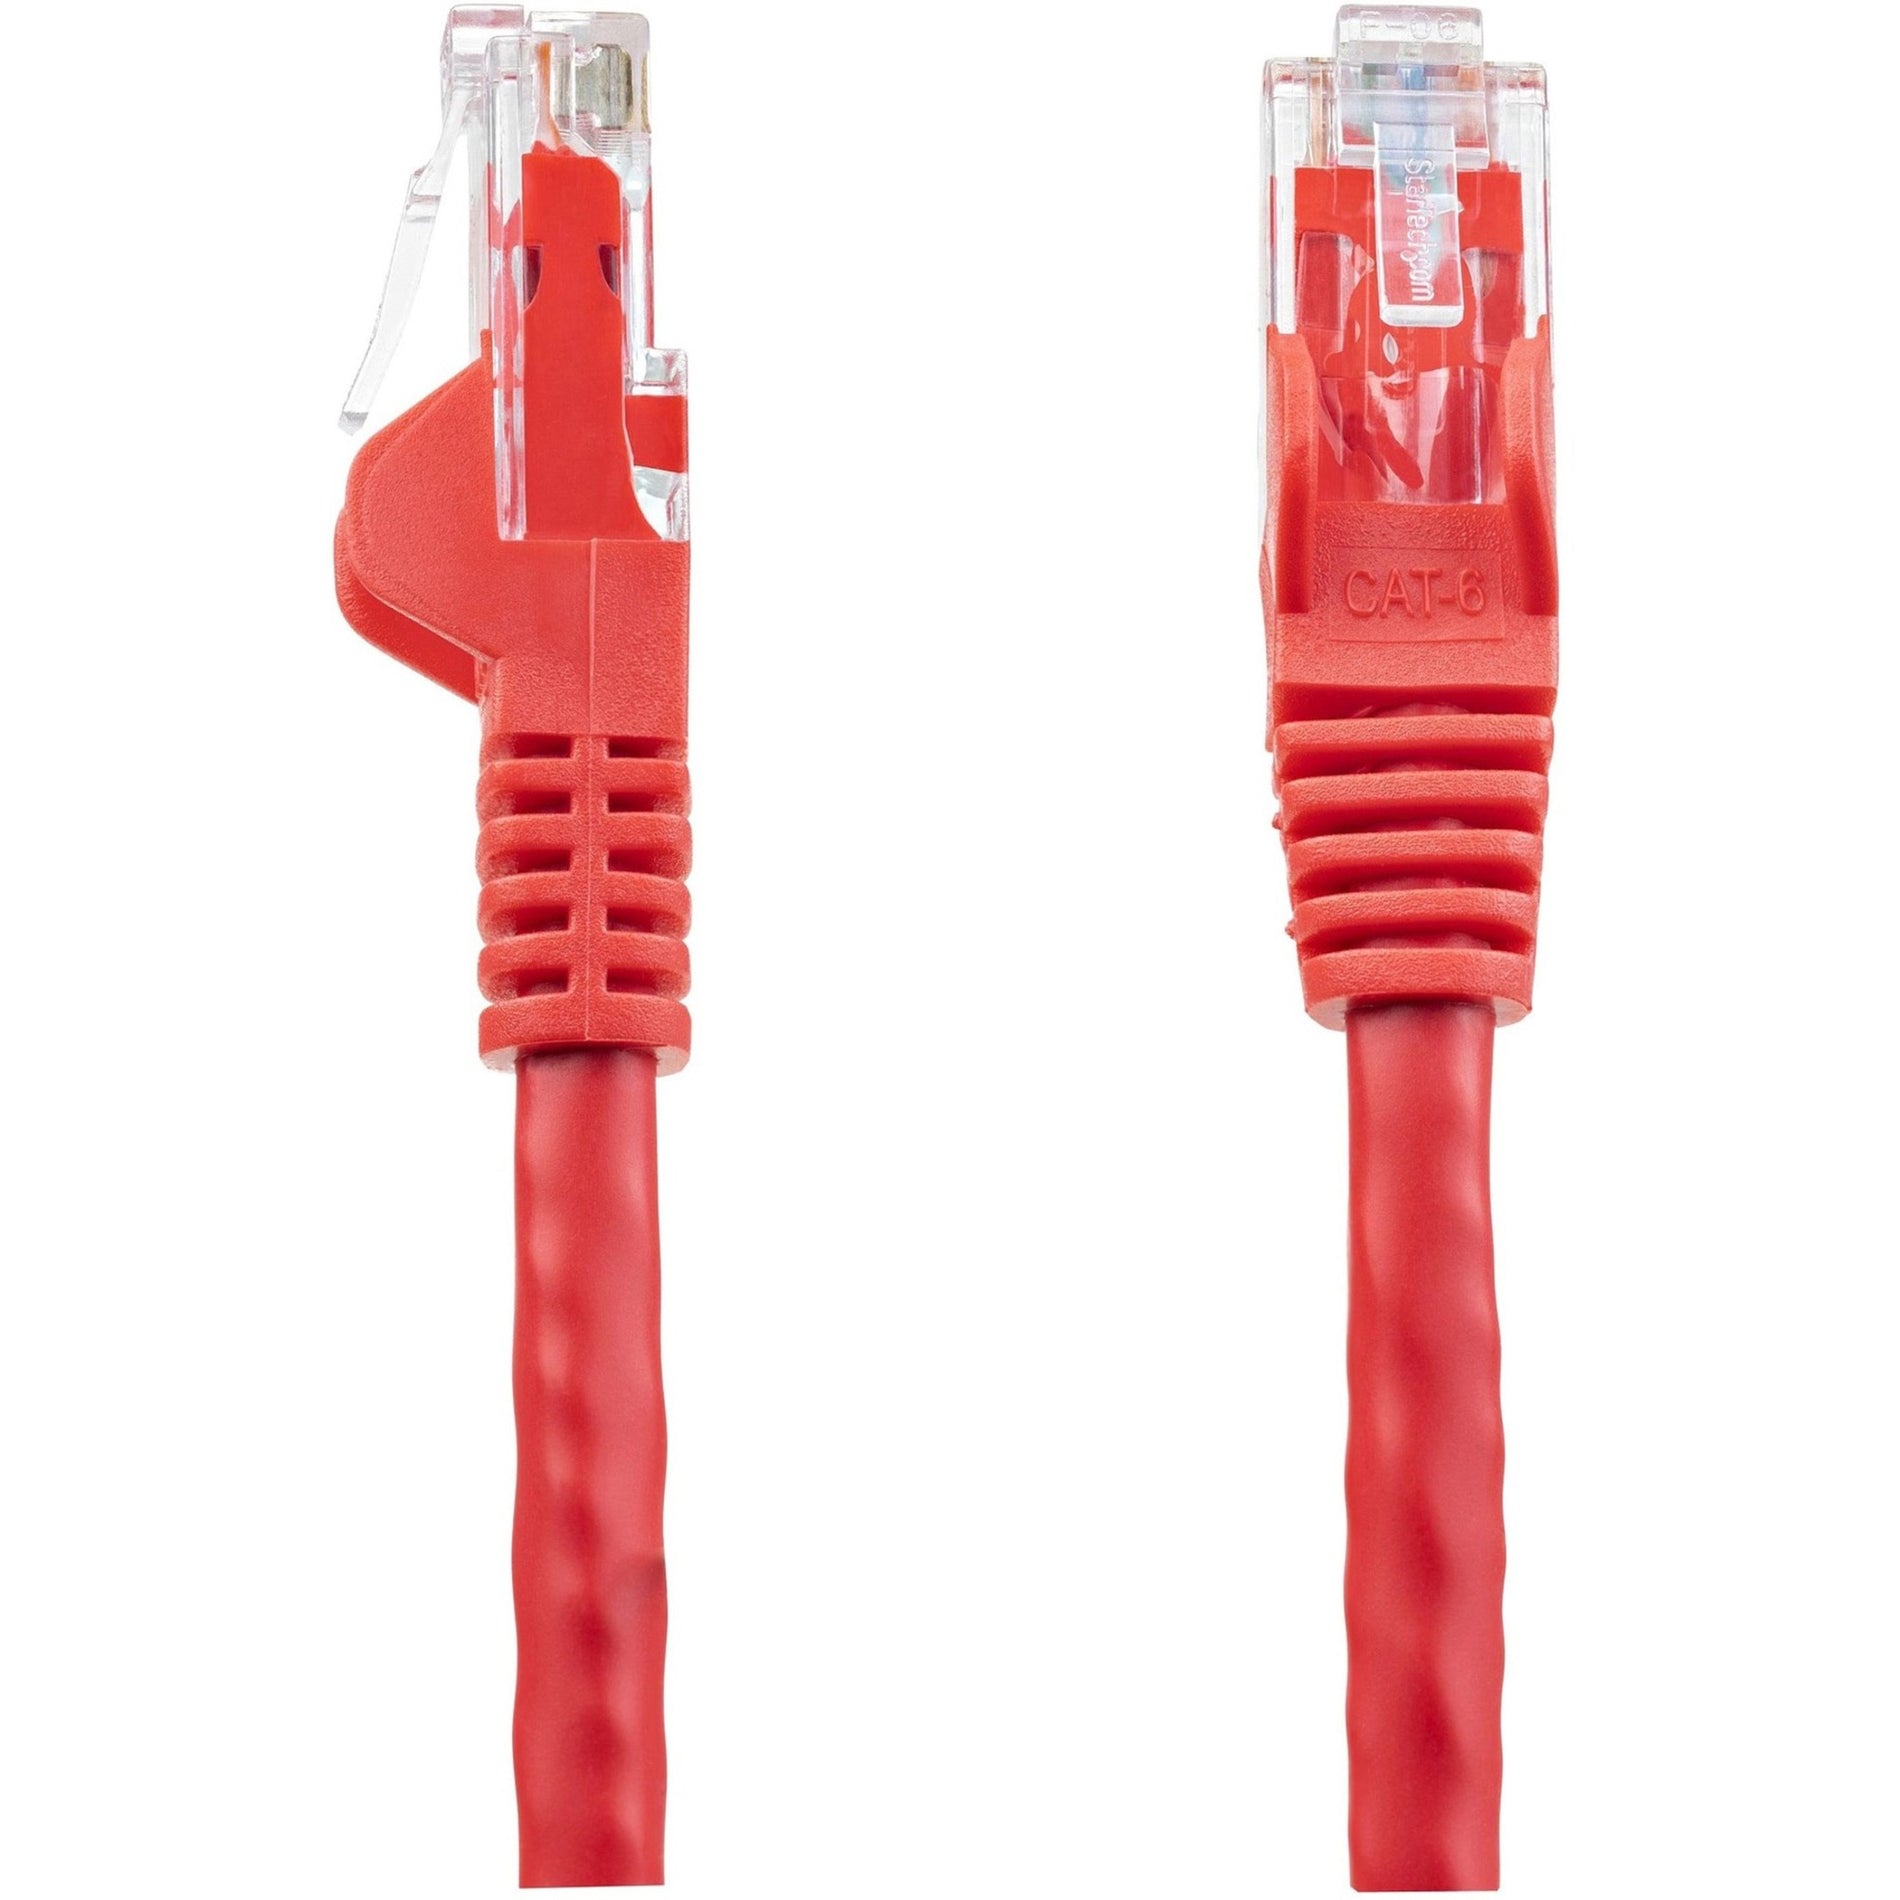 StarTech.com N6PATCH3RD 3 ft Red Snagless Cat6 UTP Patch Cable, Lifetime Warranty, 10 Gbit/s Data Transfer Rate